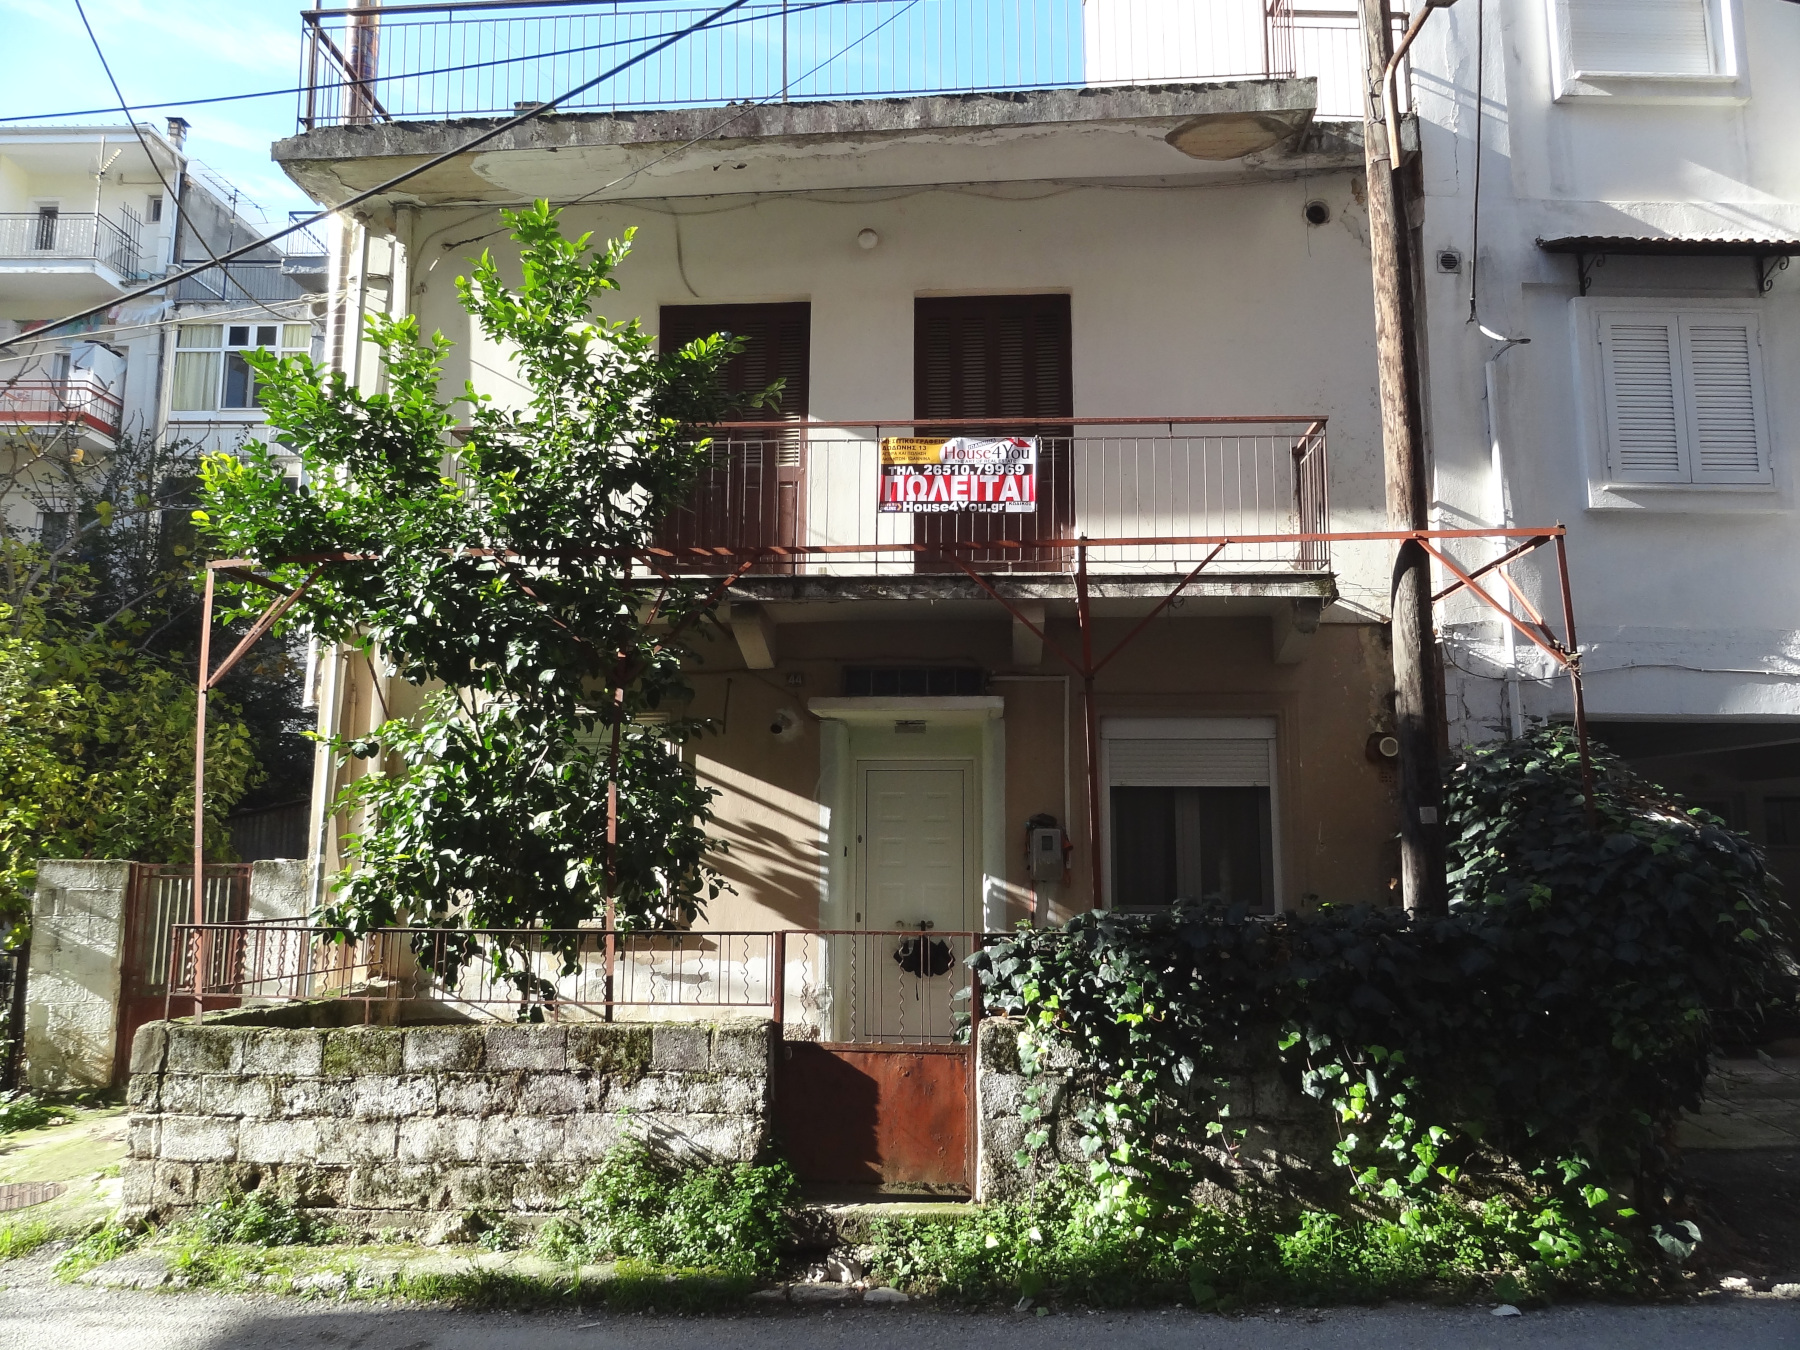 Plot of 152 sq.m. for sale. with S.D. 2.4 in Kaloutsiani in Ioannina on 44 Solomou Street